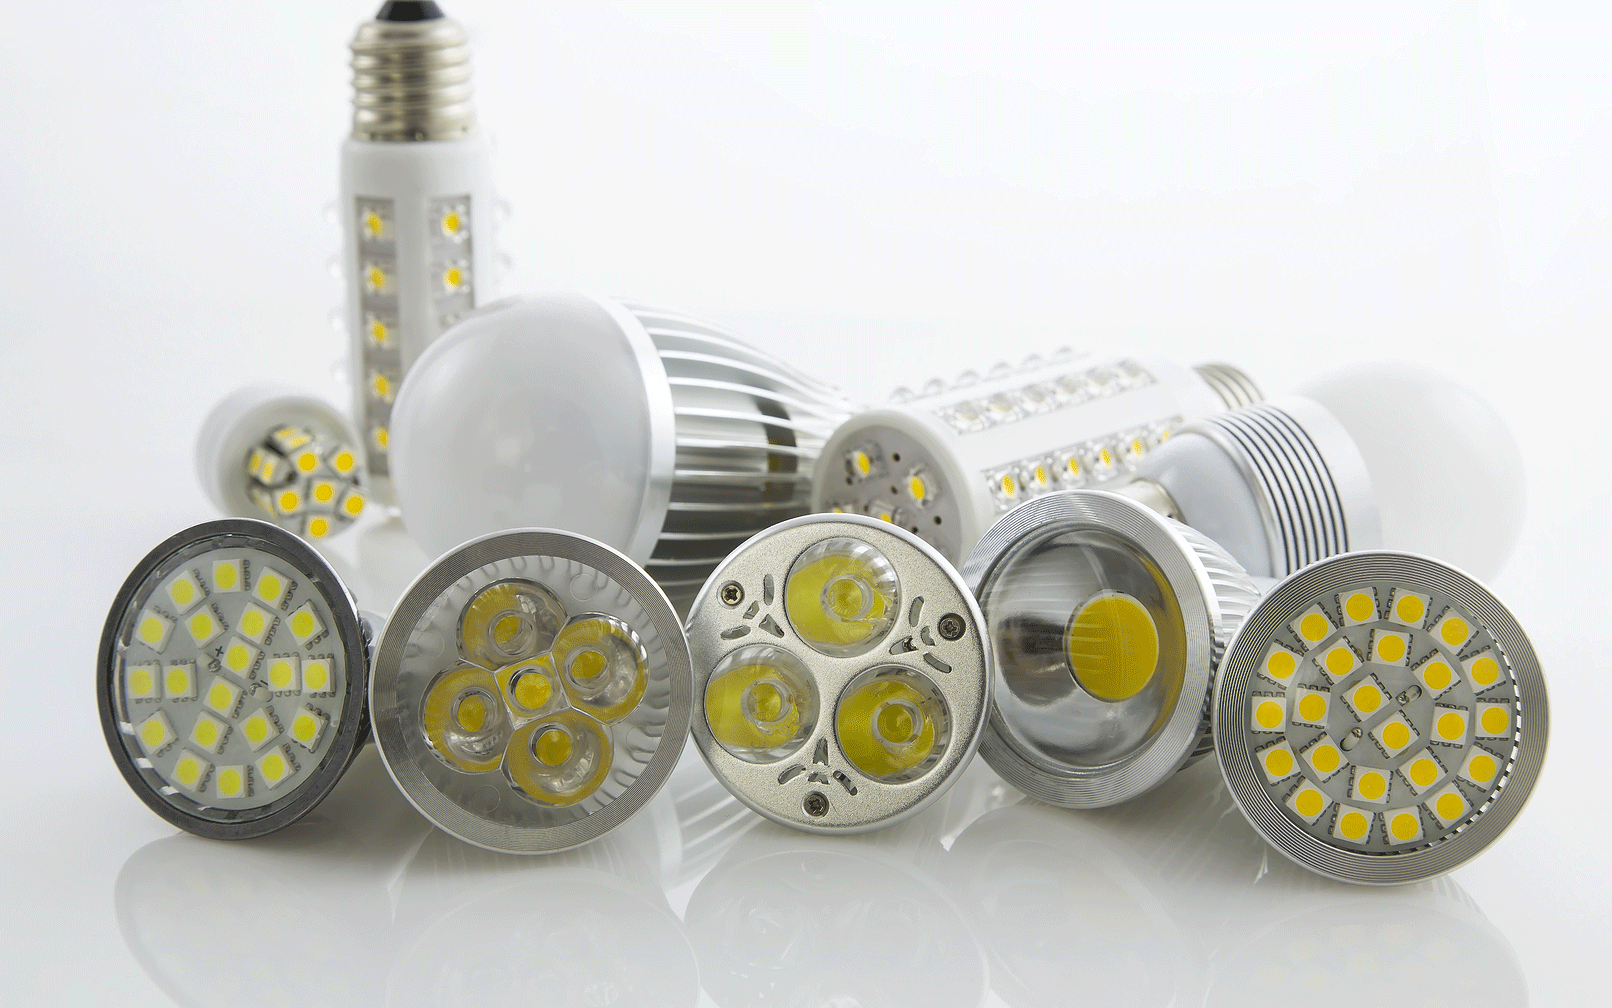 Researchers Discover Unexpected Use For LED Bulbs